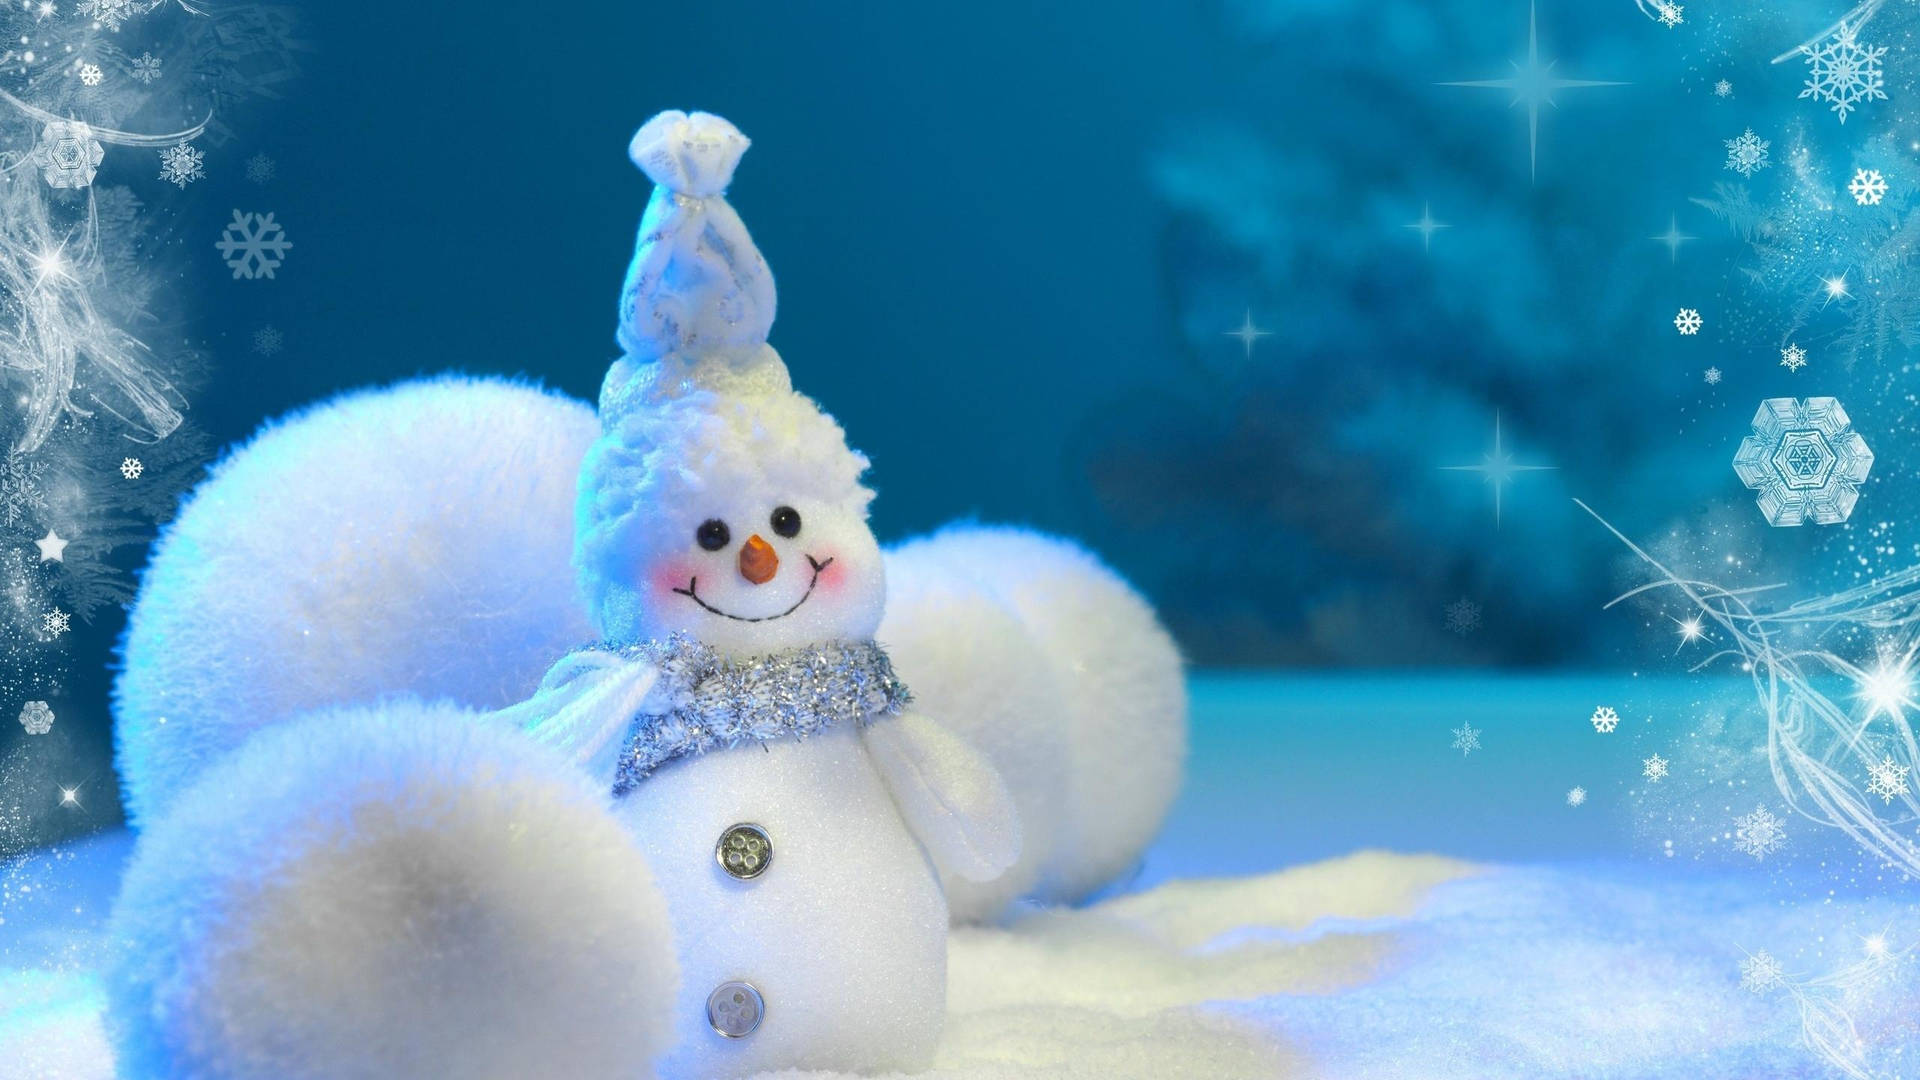 "Embrace the winter season with this adorable snowman!" Wallpaper